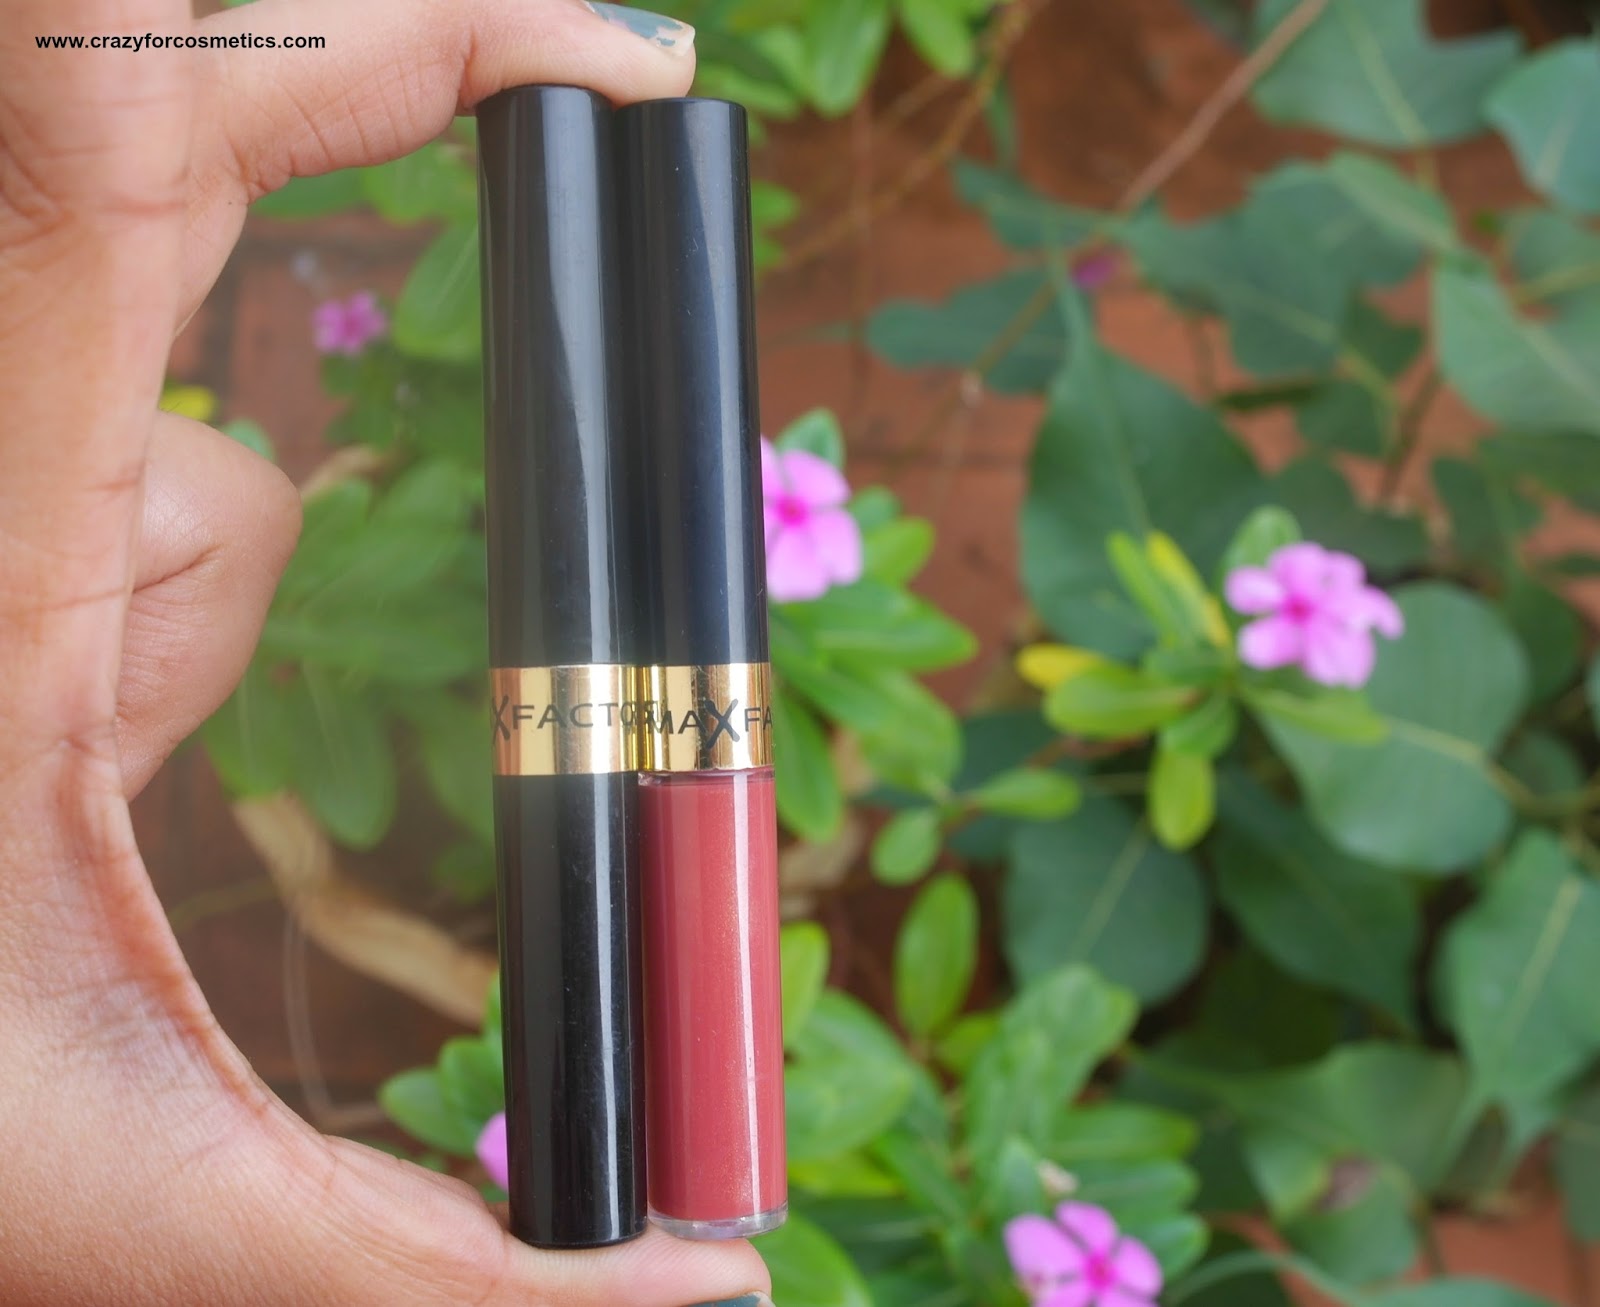 Max factor Lipfinity Lip Tint in Spicy Review